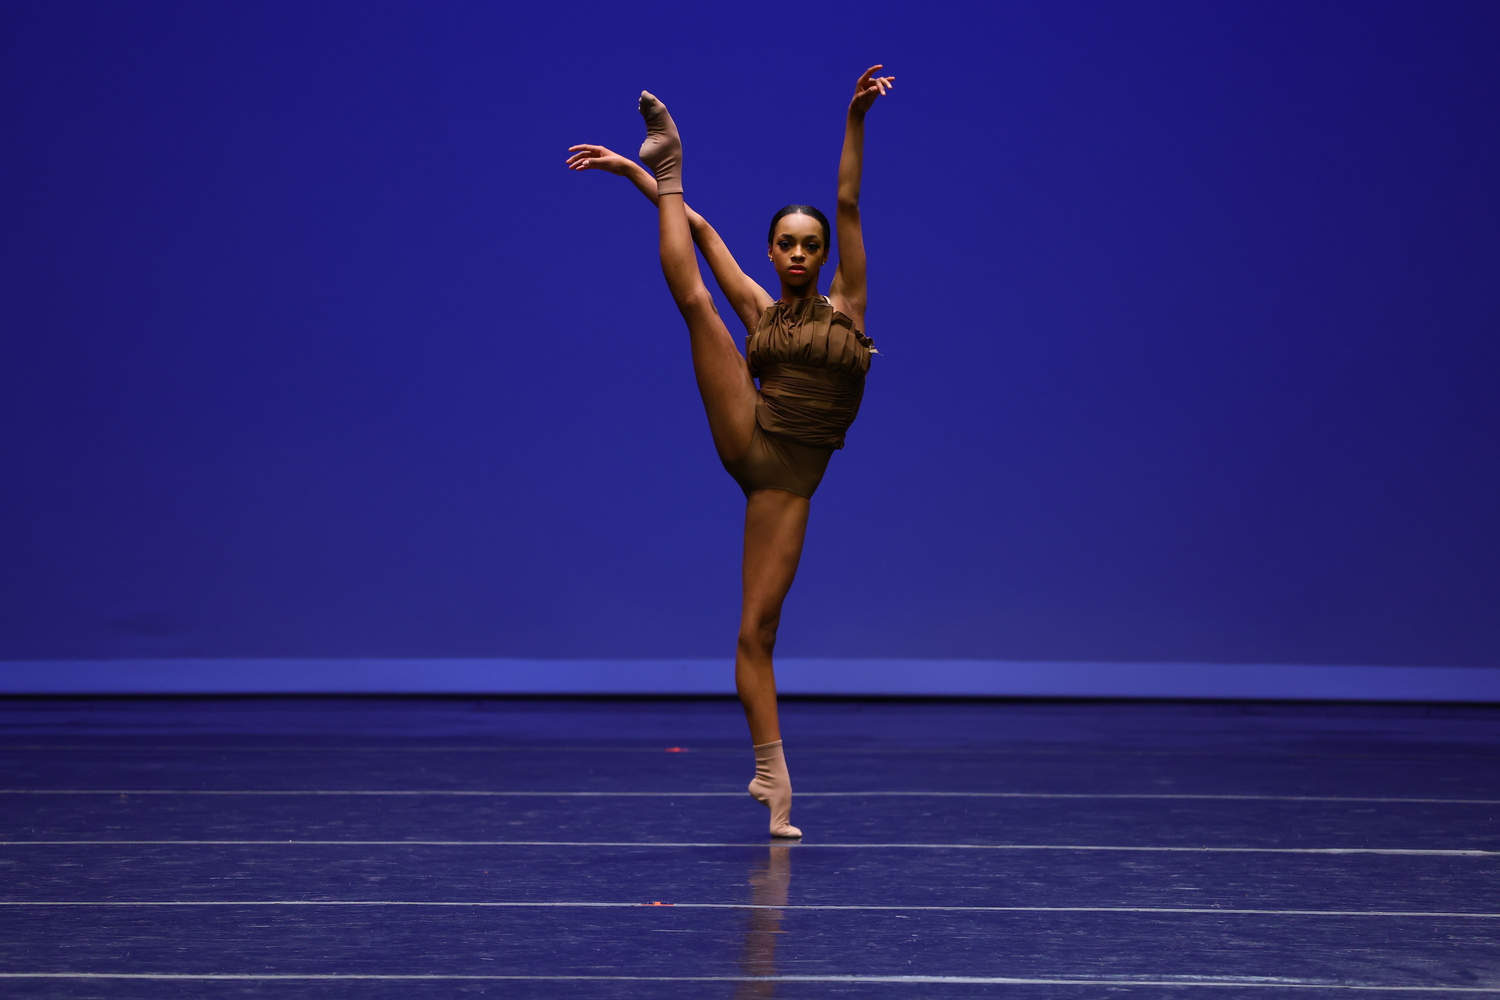 A young ballet student performs a contemporary solo onstage in front of a blue backdrop at YAGP. She wears a brown embellished leotard and tan socks, and does a développé à la seconde with her right leg lifted high. She raises her arms up above her head and looks straight ahead at the audnience.